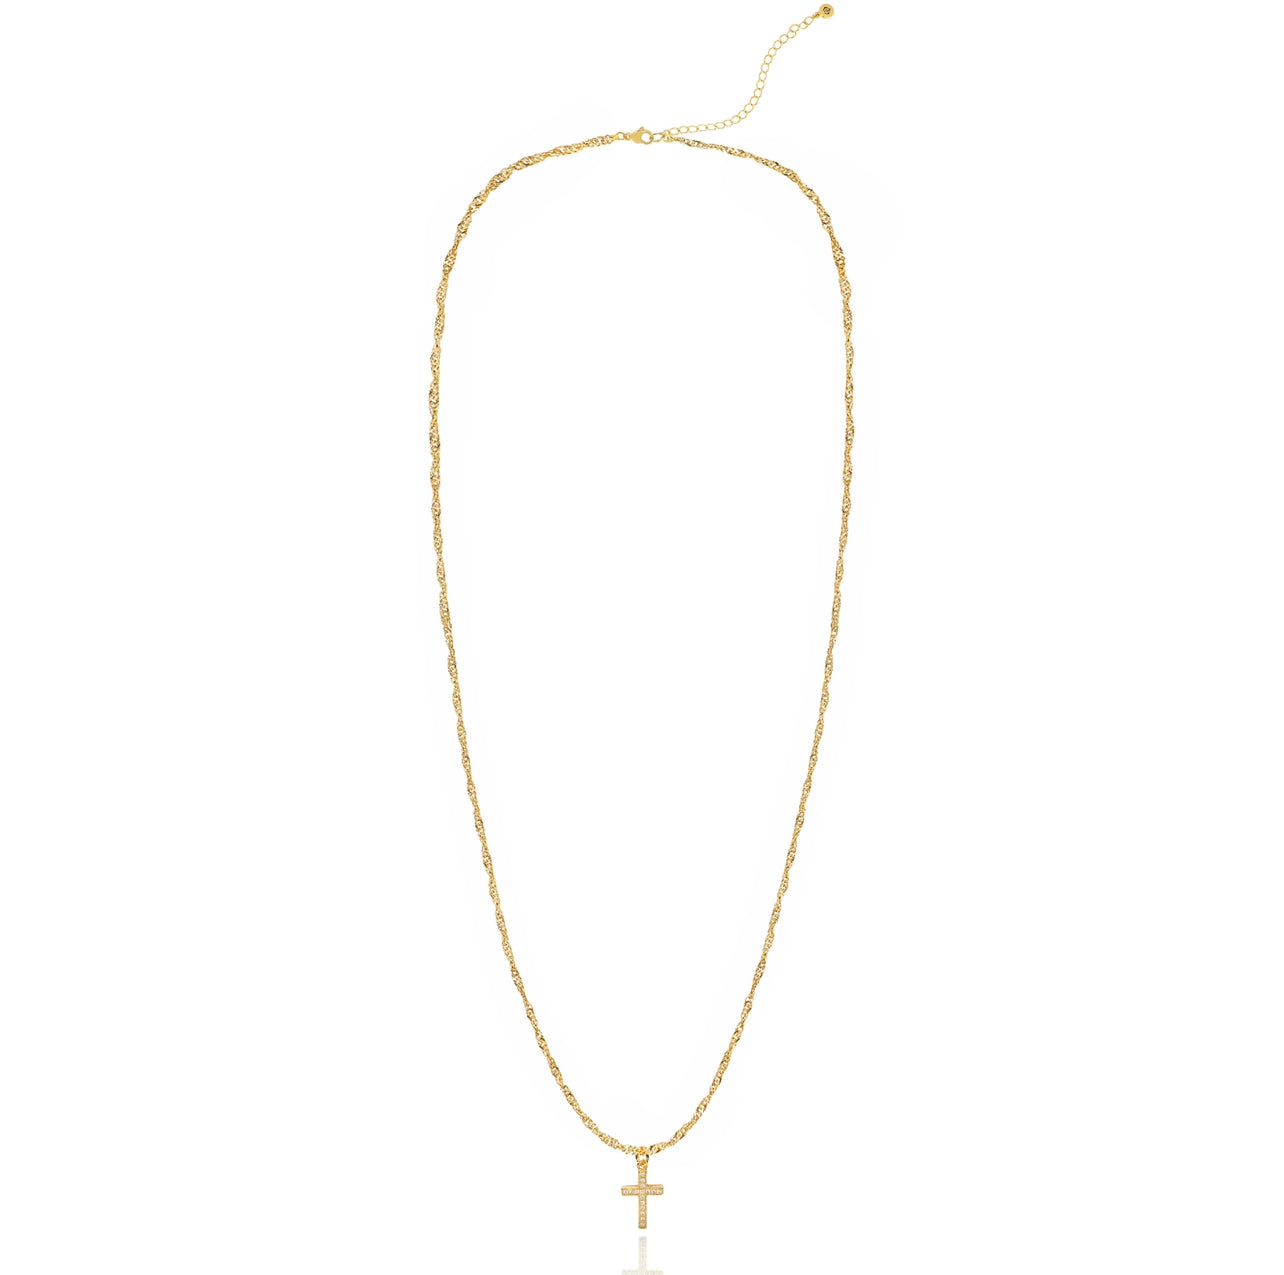 Beloved Necklace in Gold and Silver